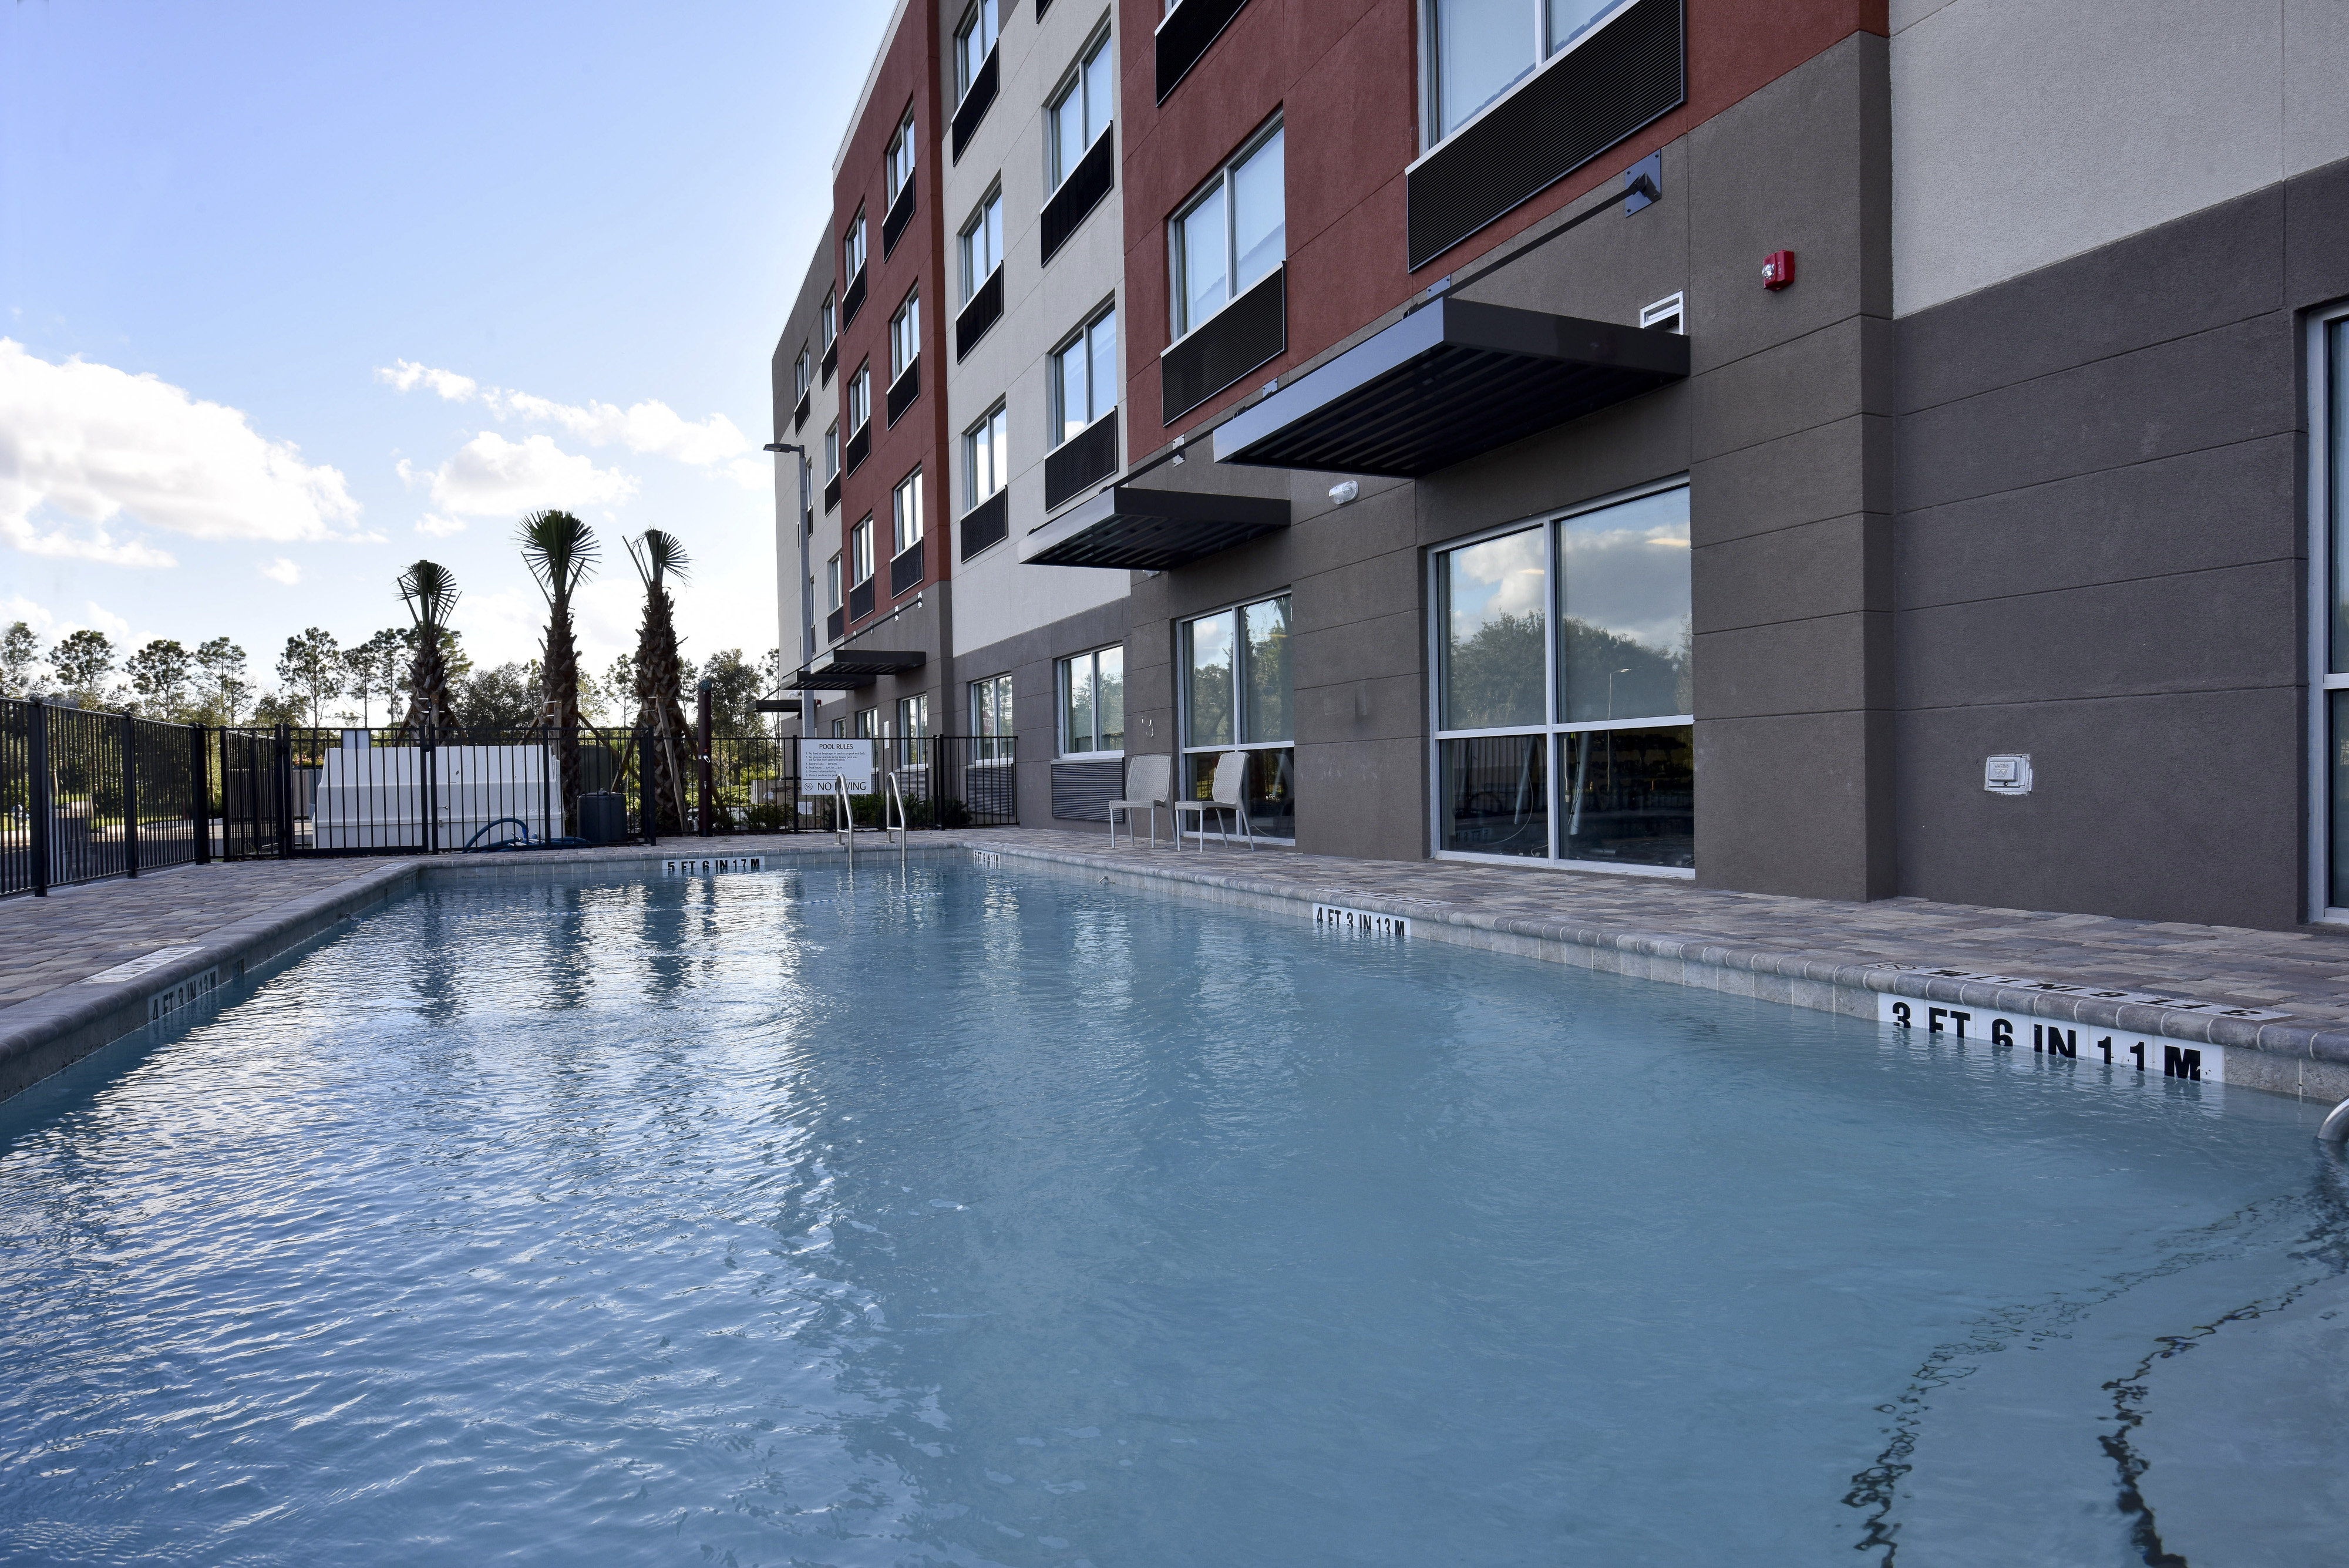 Have a morning or afternoon dip in our outdoor pool.